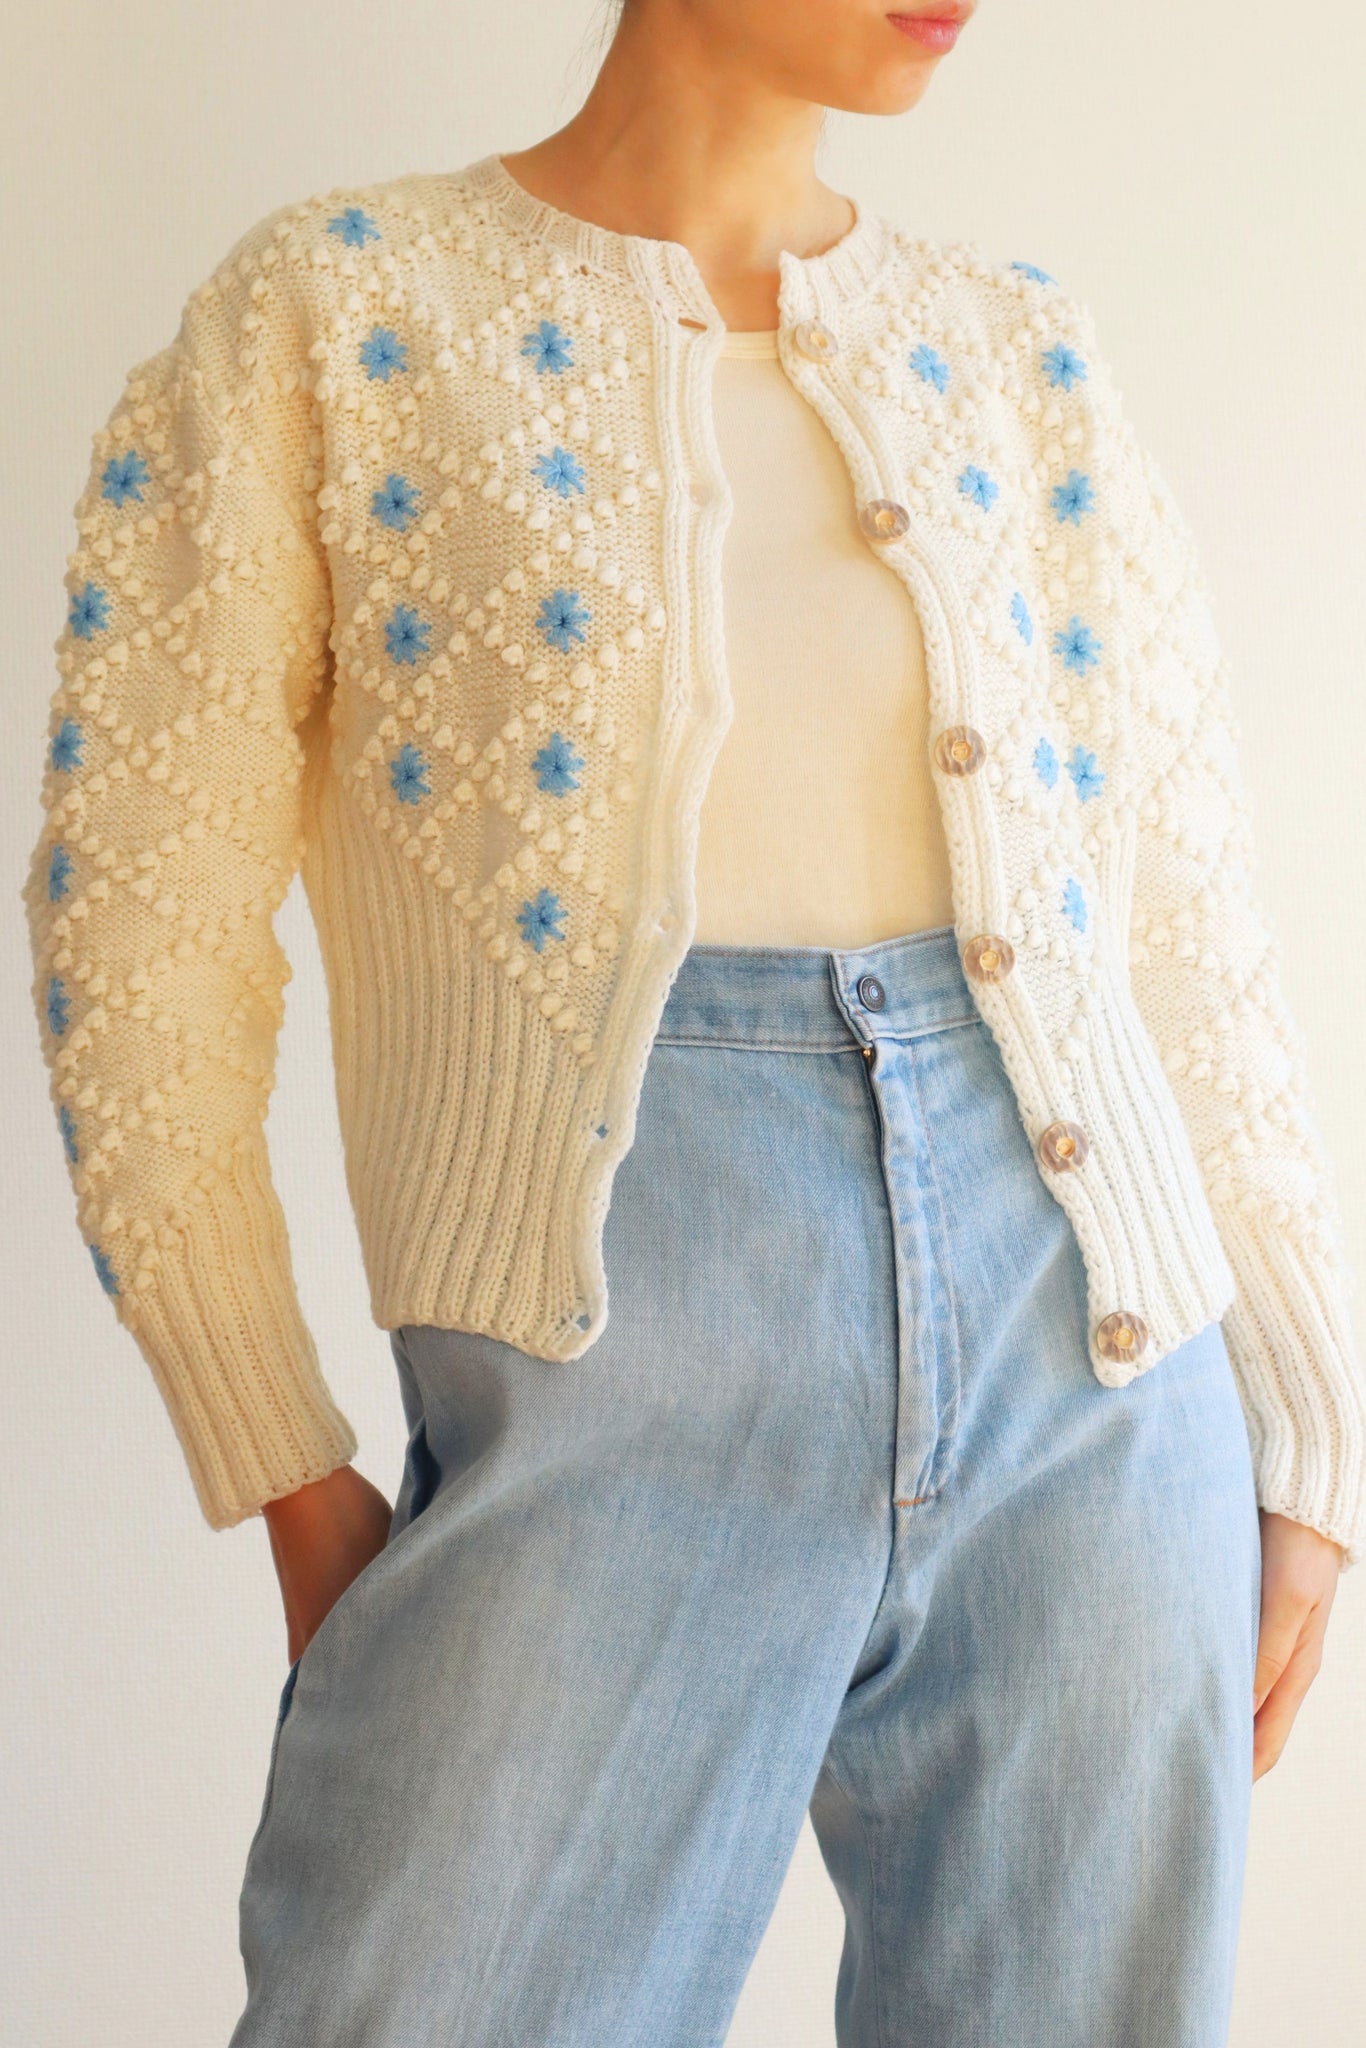 80s Blue Flower Embroidery Hand Knit Austrian Cardigan